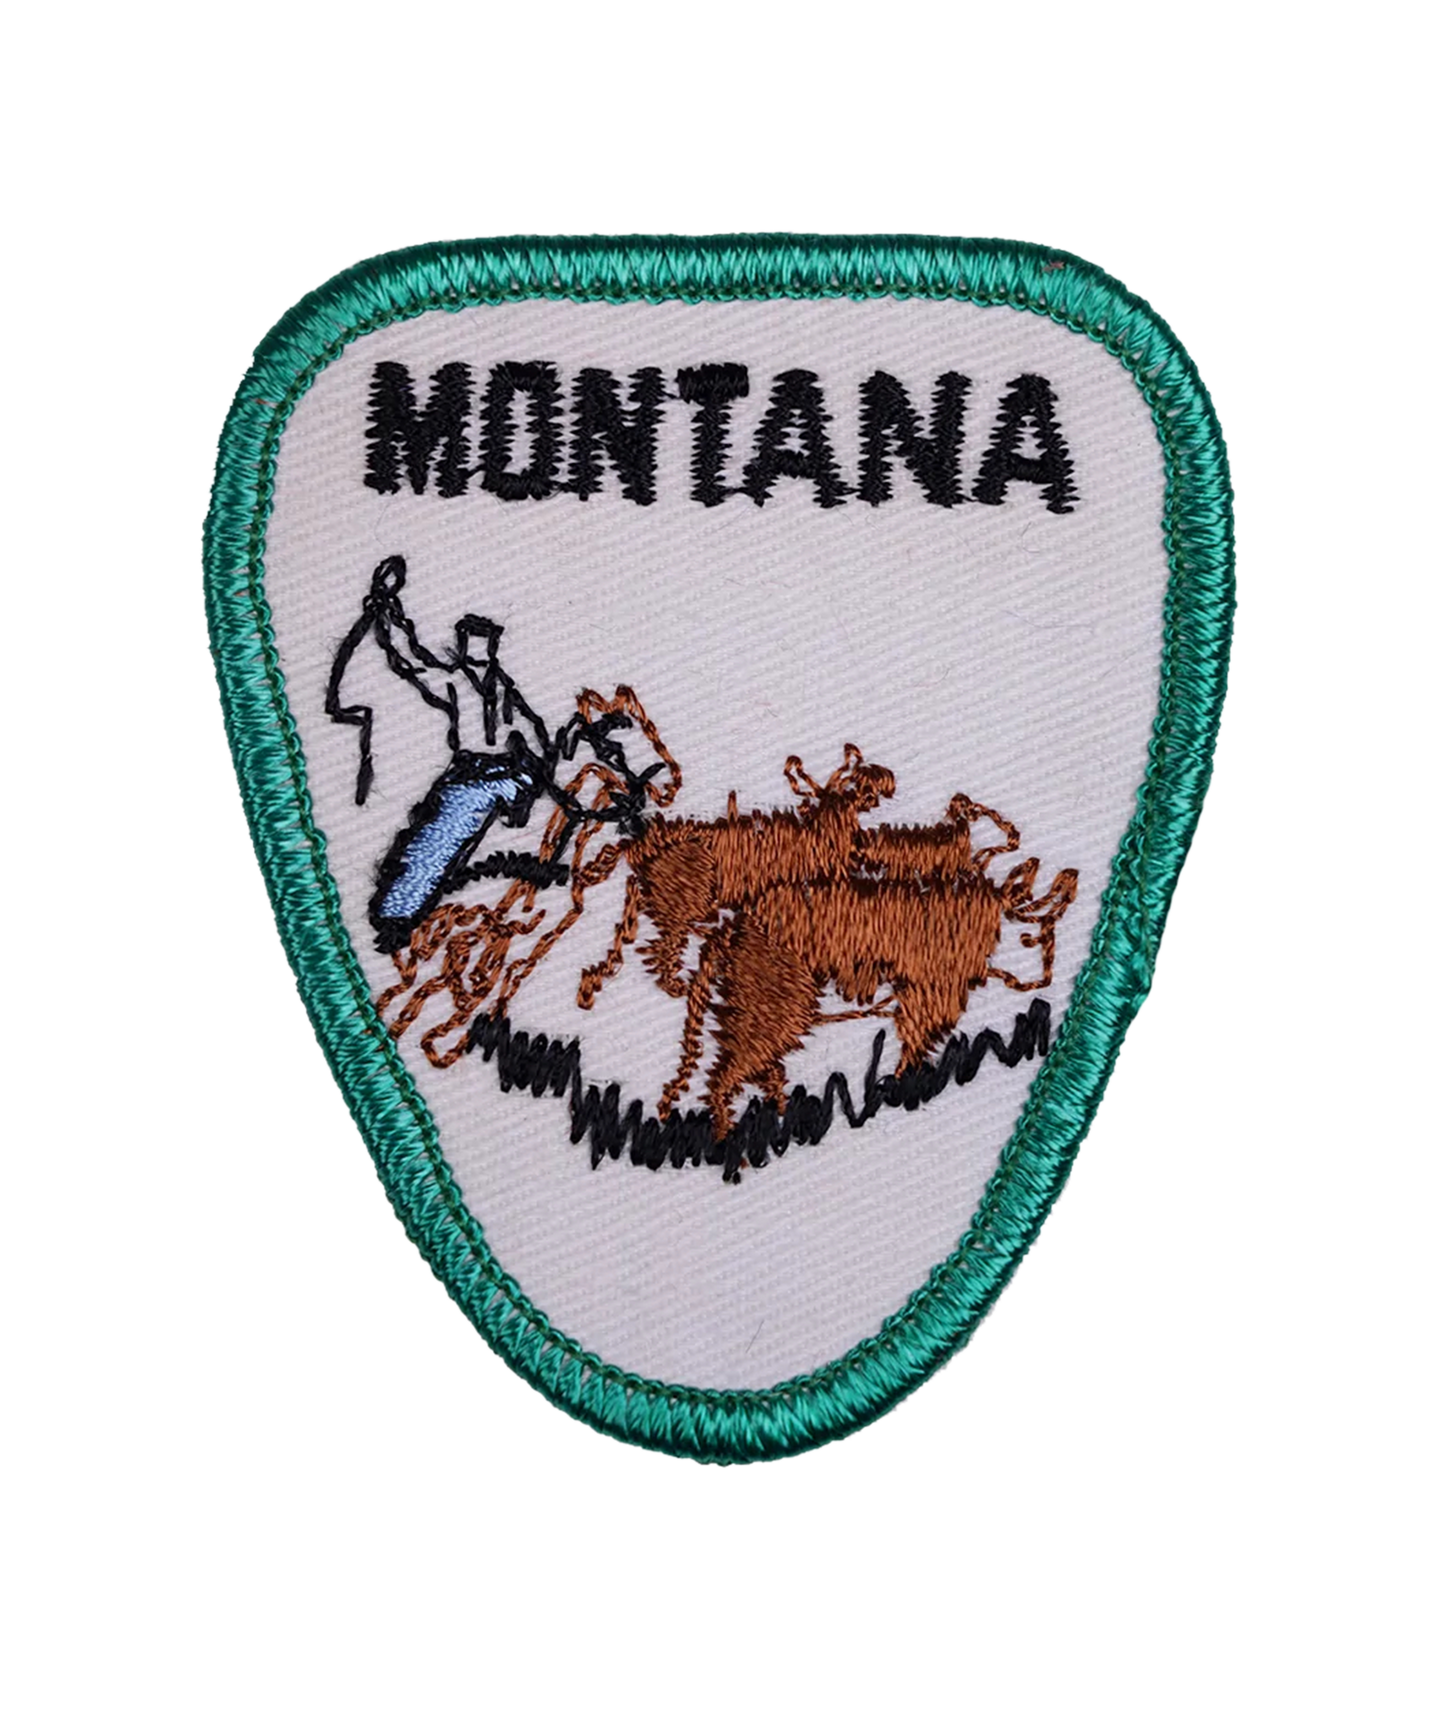 Vintage Montana Embroidered Patch